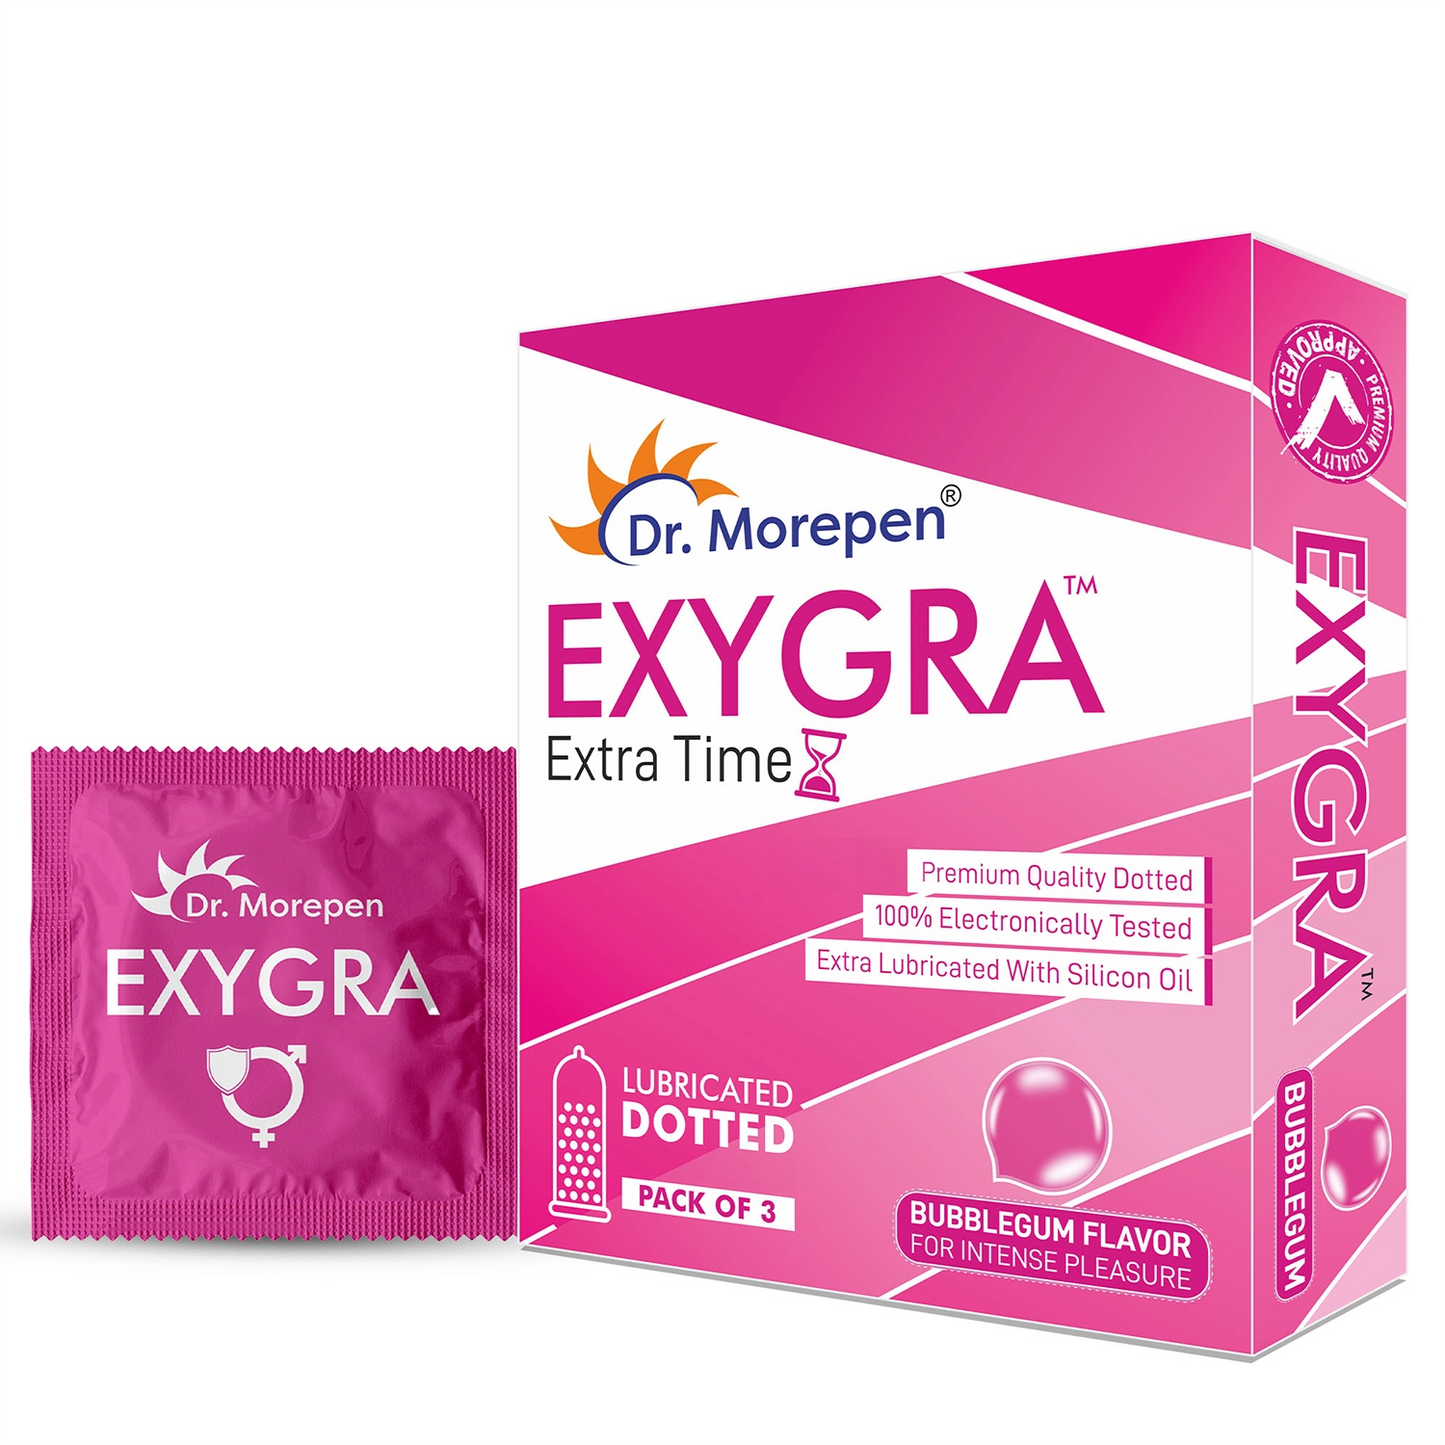 Dr Morepen Exygra Condom Dotted 3S (Pack Of 10)- Make Safe Love Stay Buy Sexual Well- Bubblegum Flavor-Long Lasting